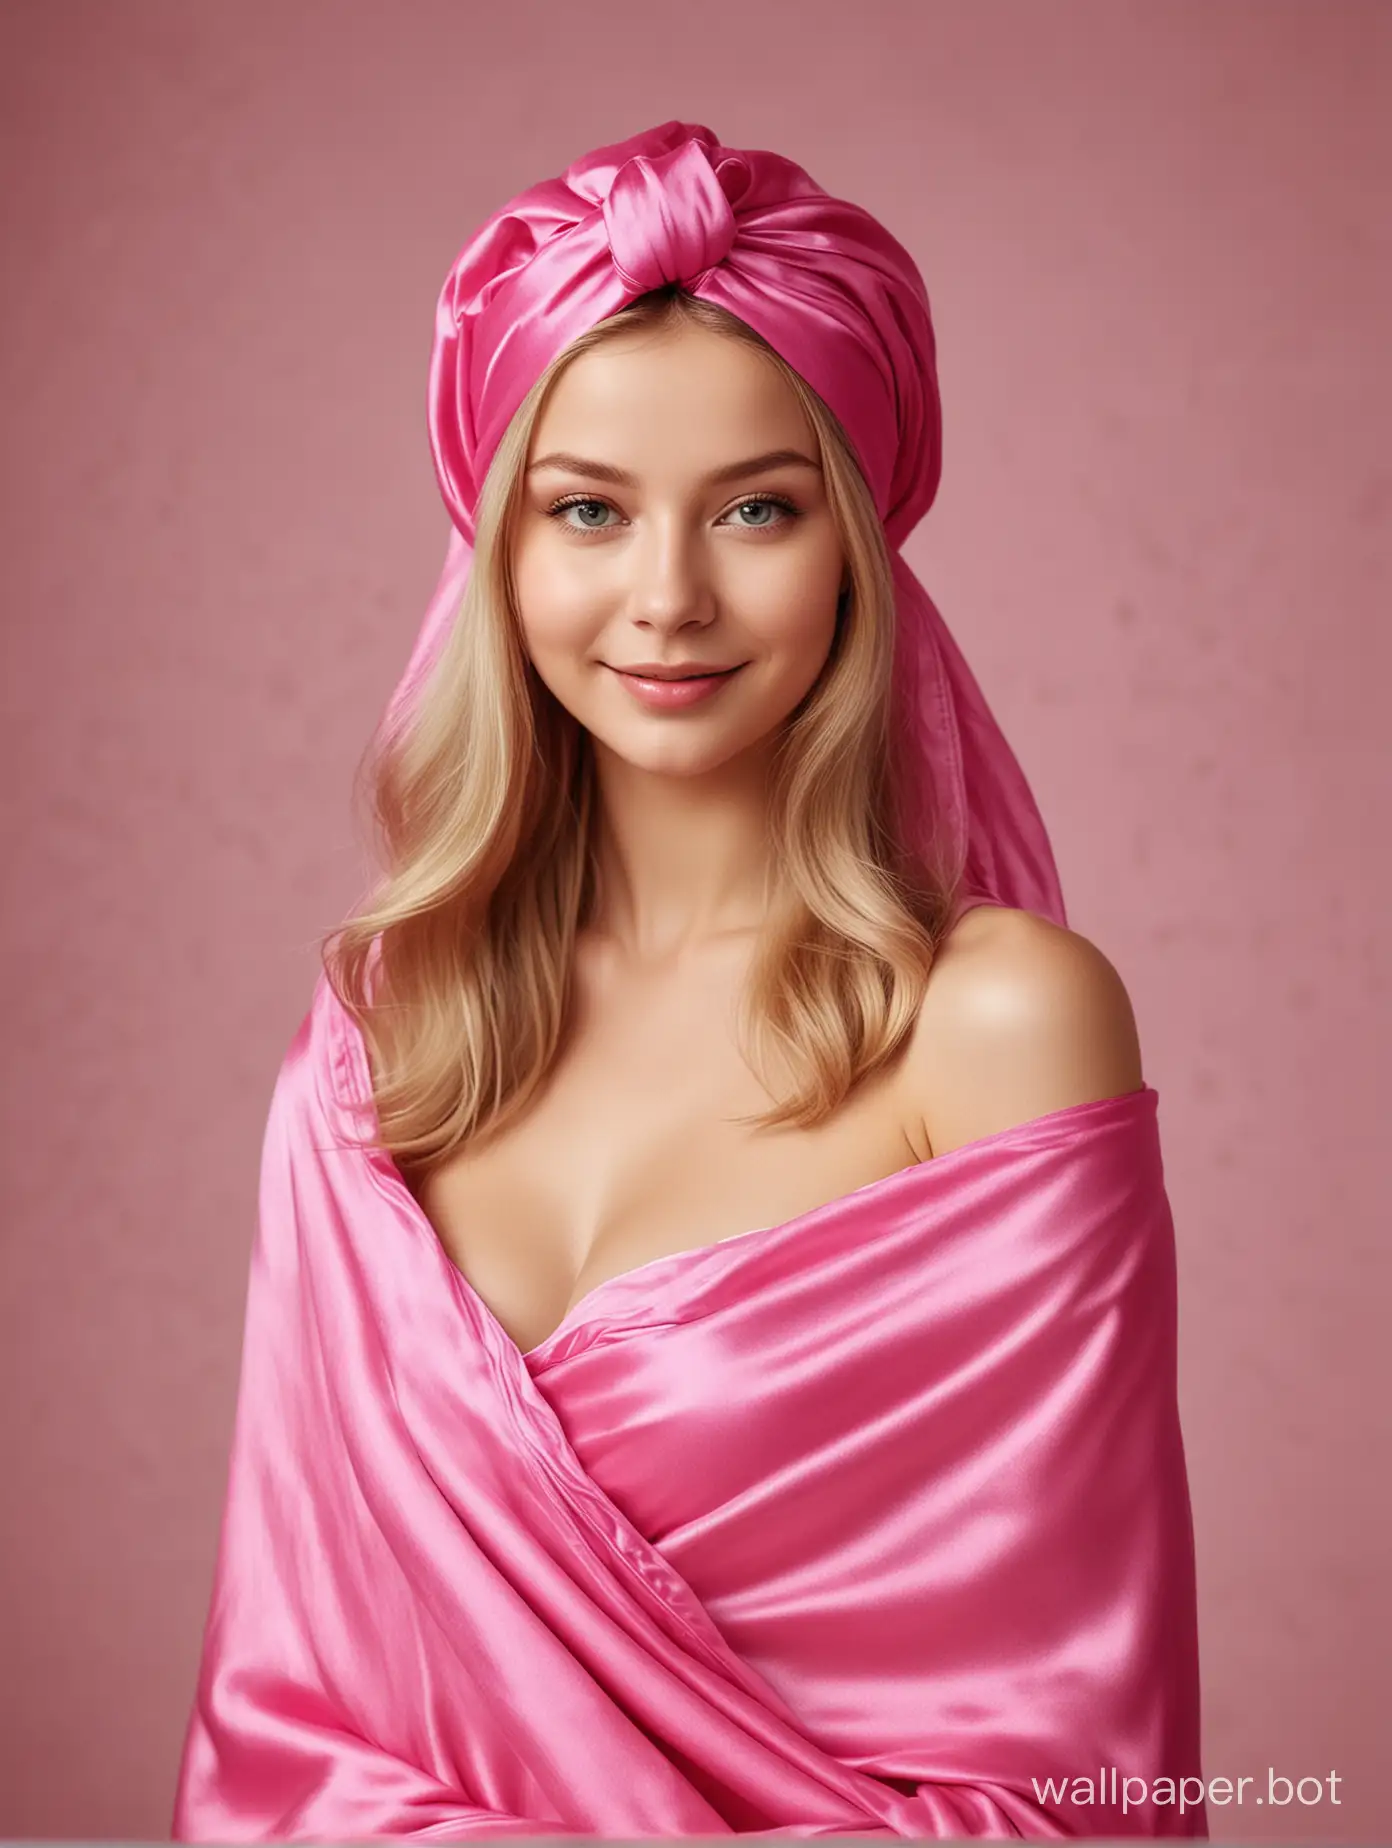 Glamourous Portrait Of Sweet, Young, Sunny Queen Yulia Lipnitskaya With Long Straight Silky Hair Smiling in Luxurious Pink fuchsia Slip Liquid Silk Dress with pink fuchsia silk towel turban and crown on the head